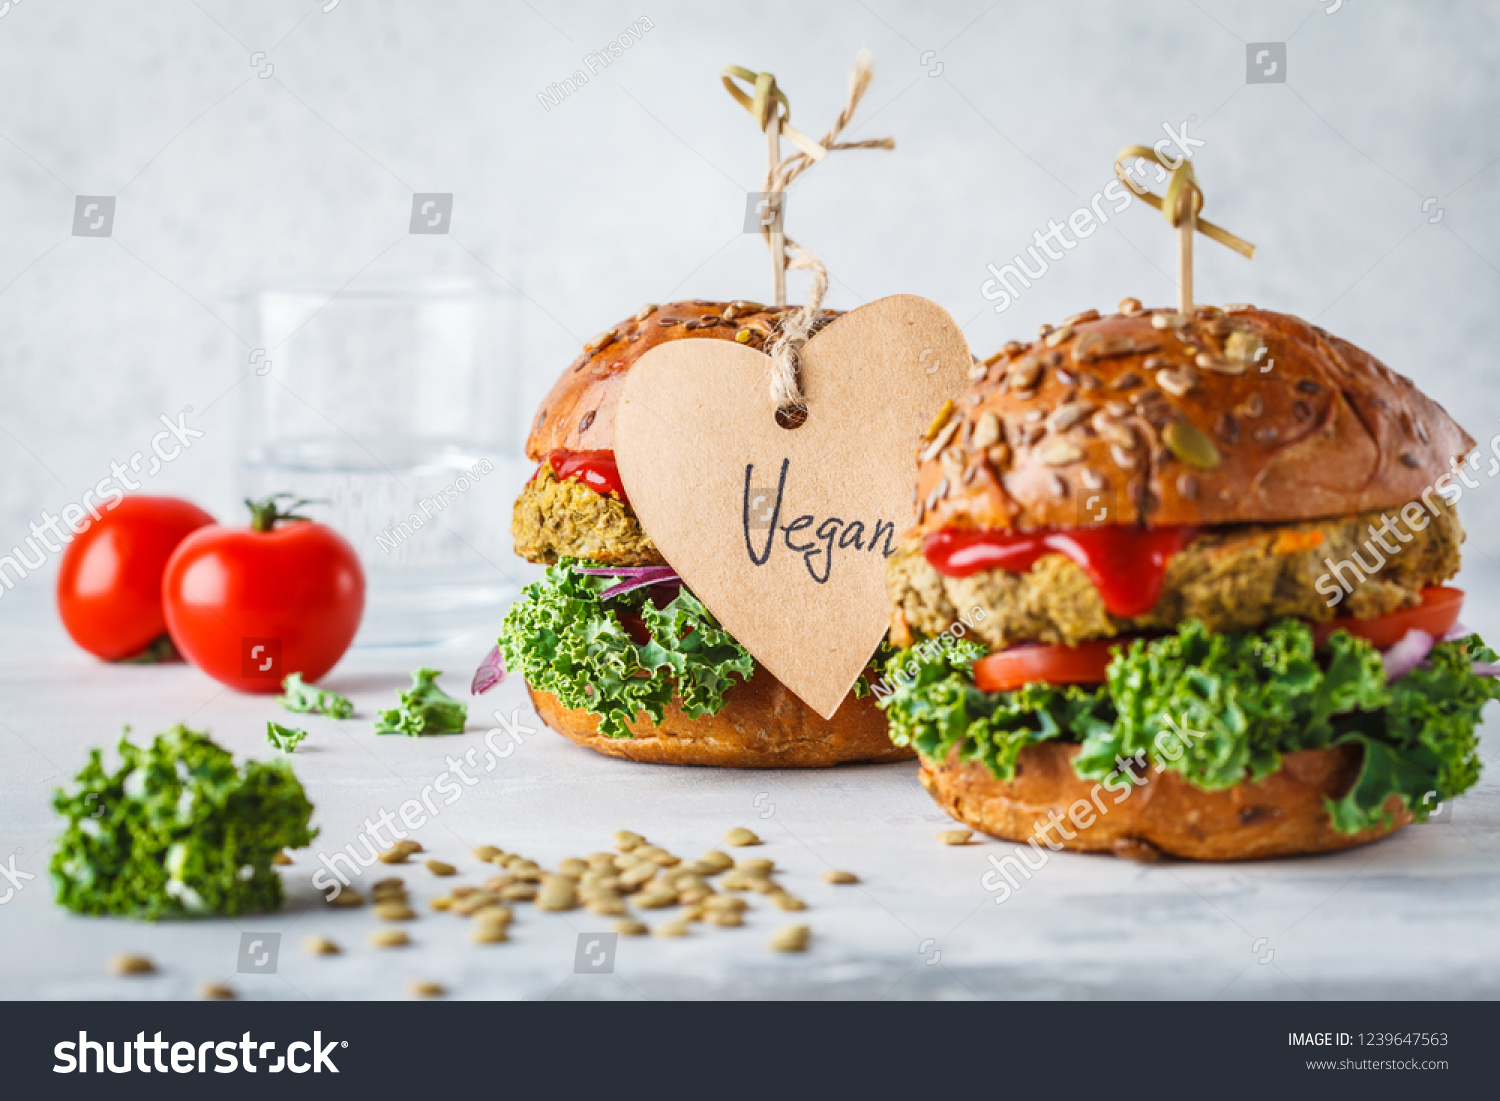 Vegan lentil burgers with kale and tomato sauce on a white background. Plant based food concept. #1239647563